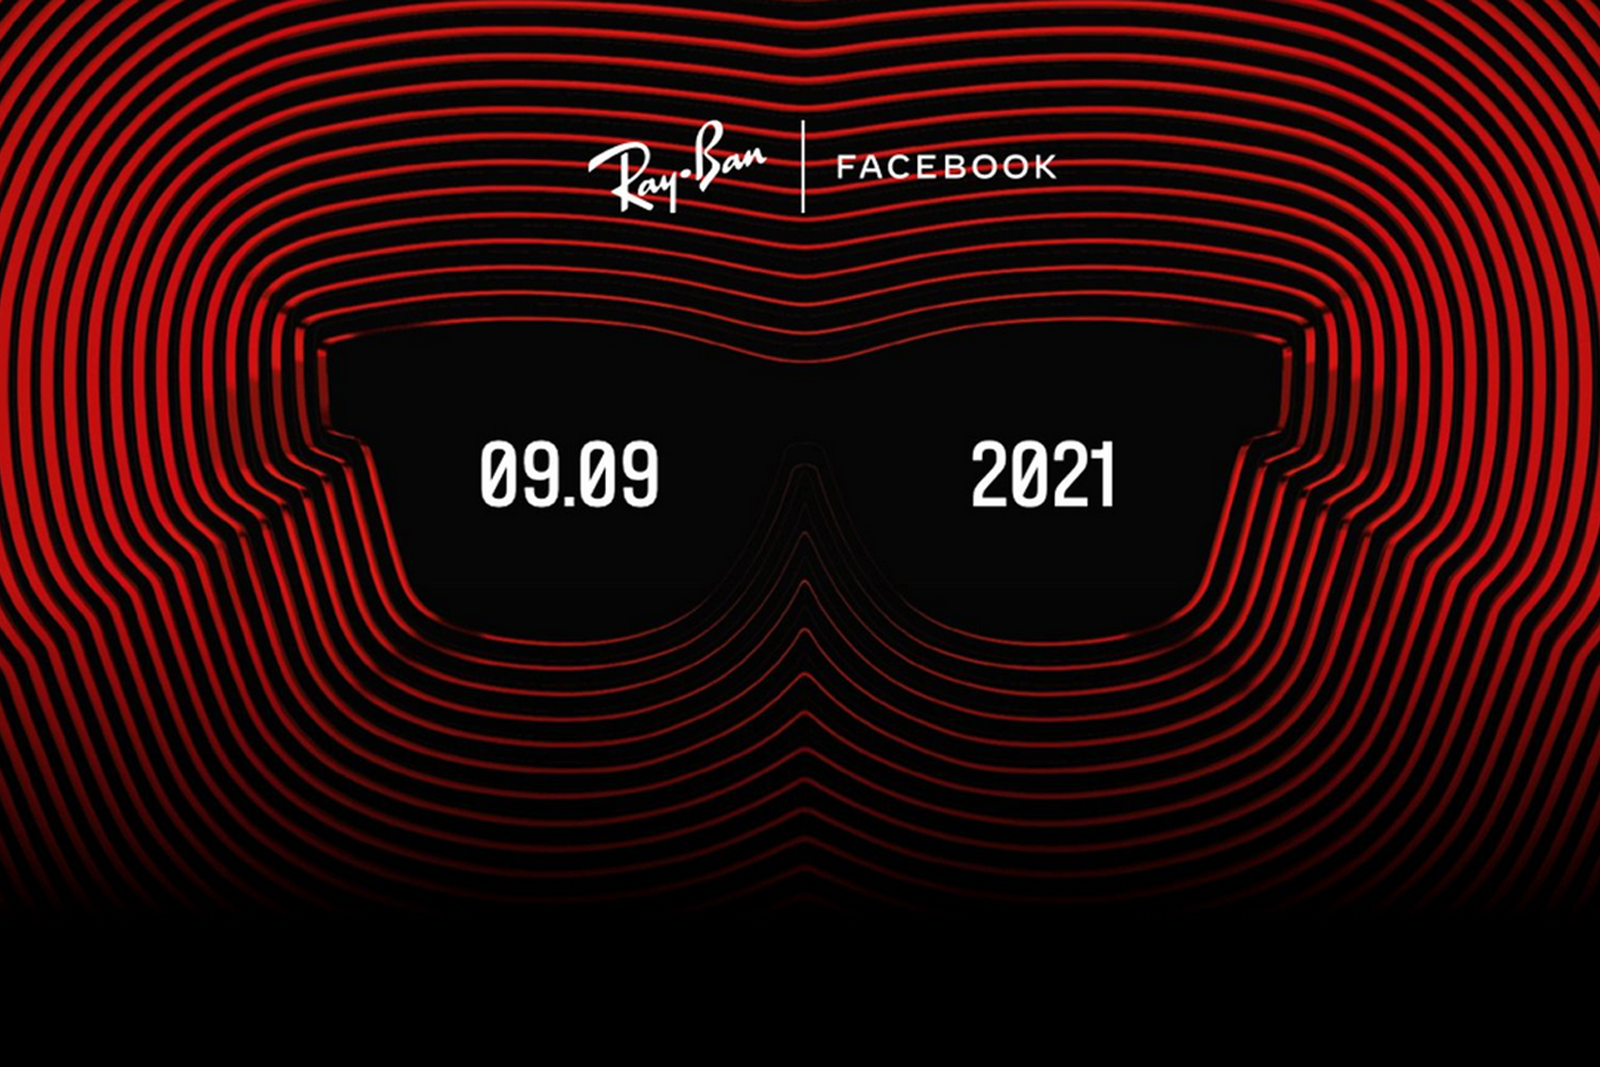 Facebook and Ray-Ban have an announcement for 9 September photo 1